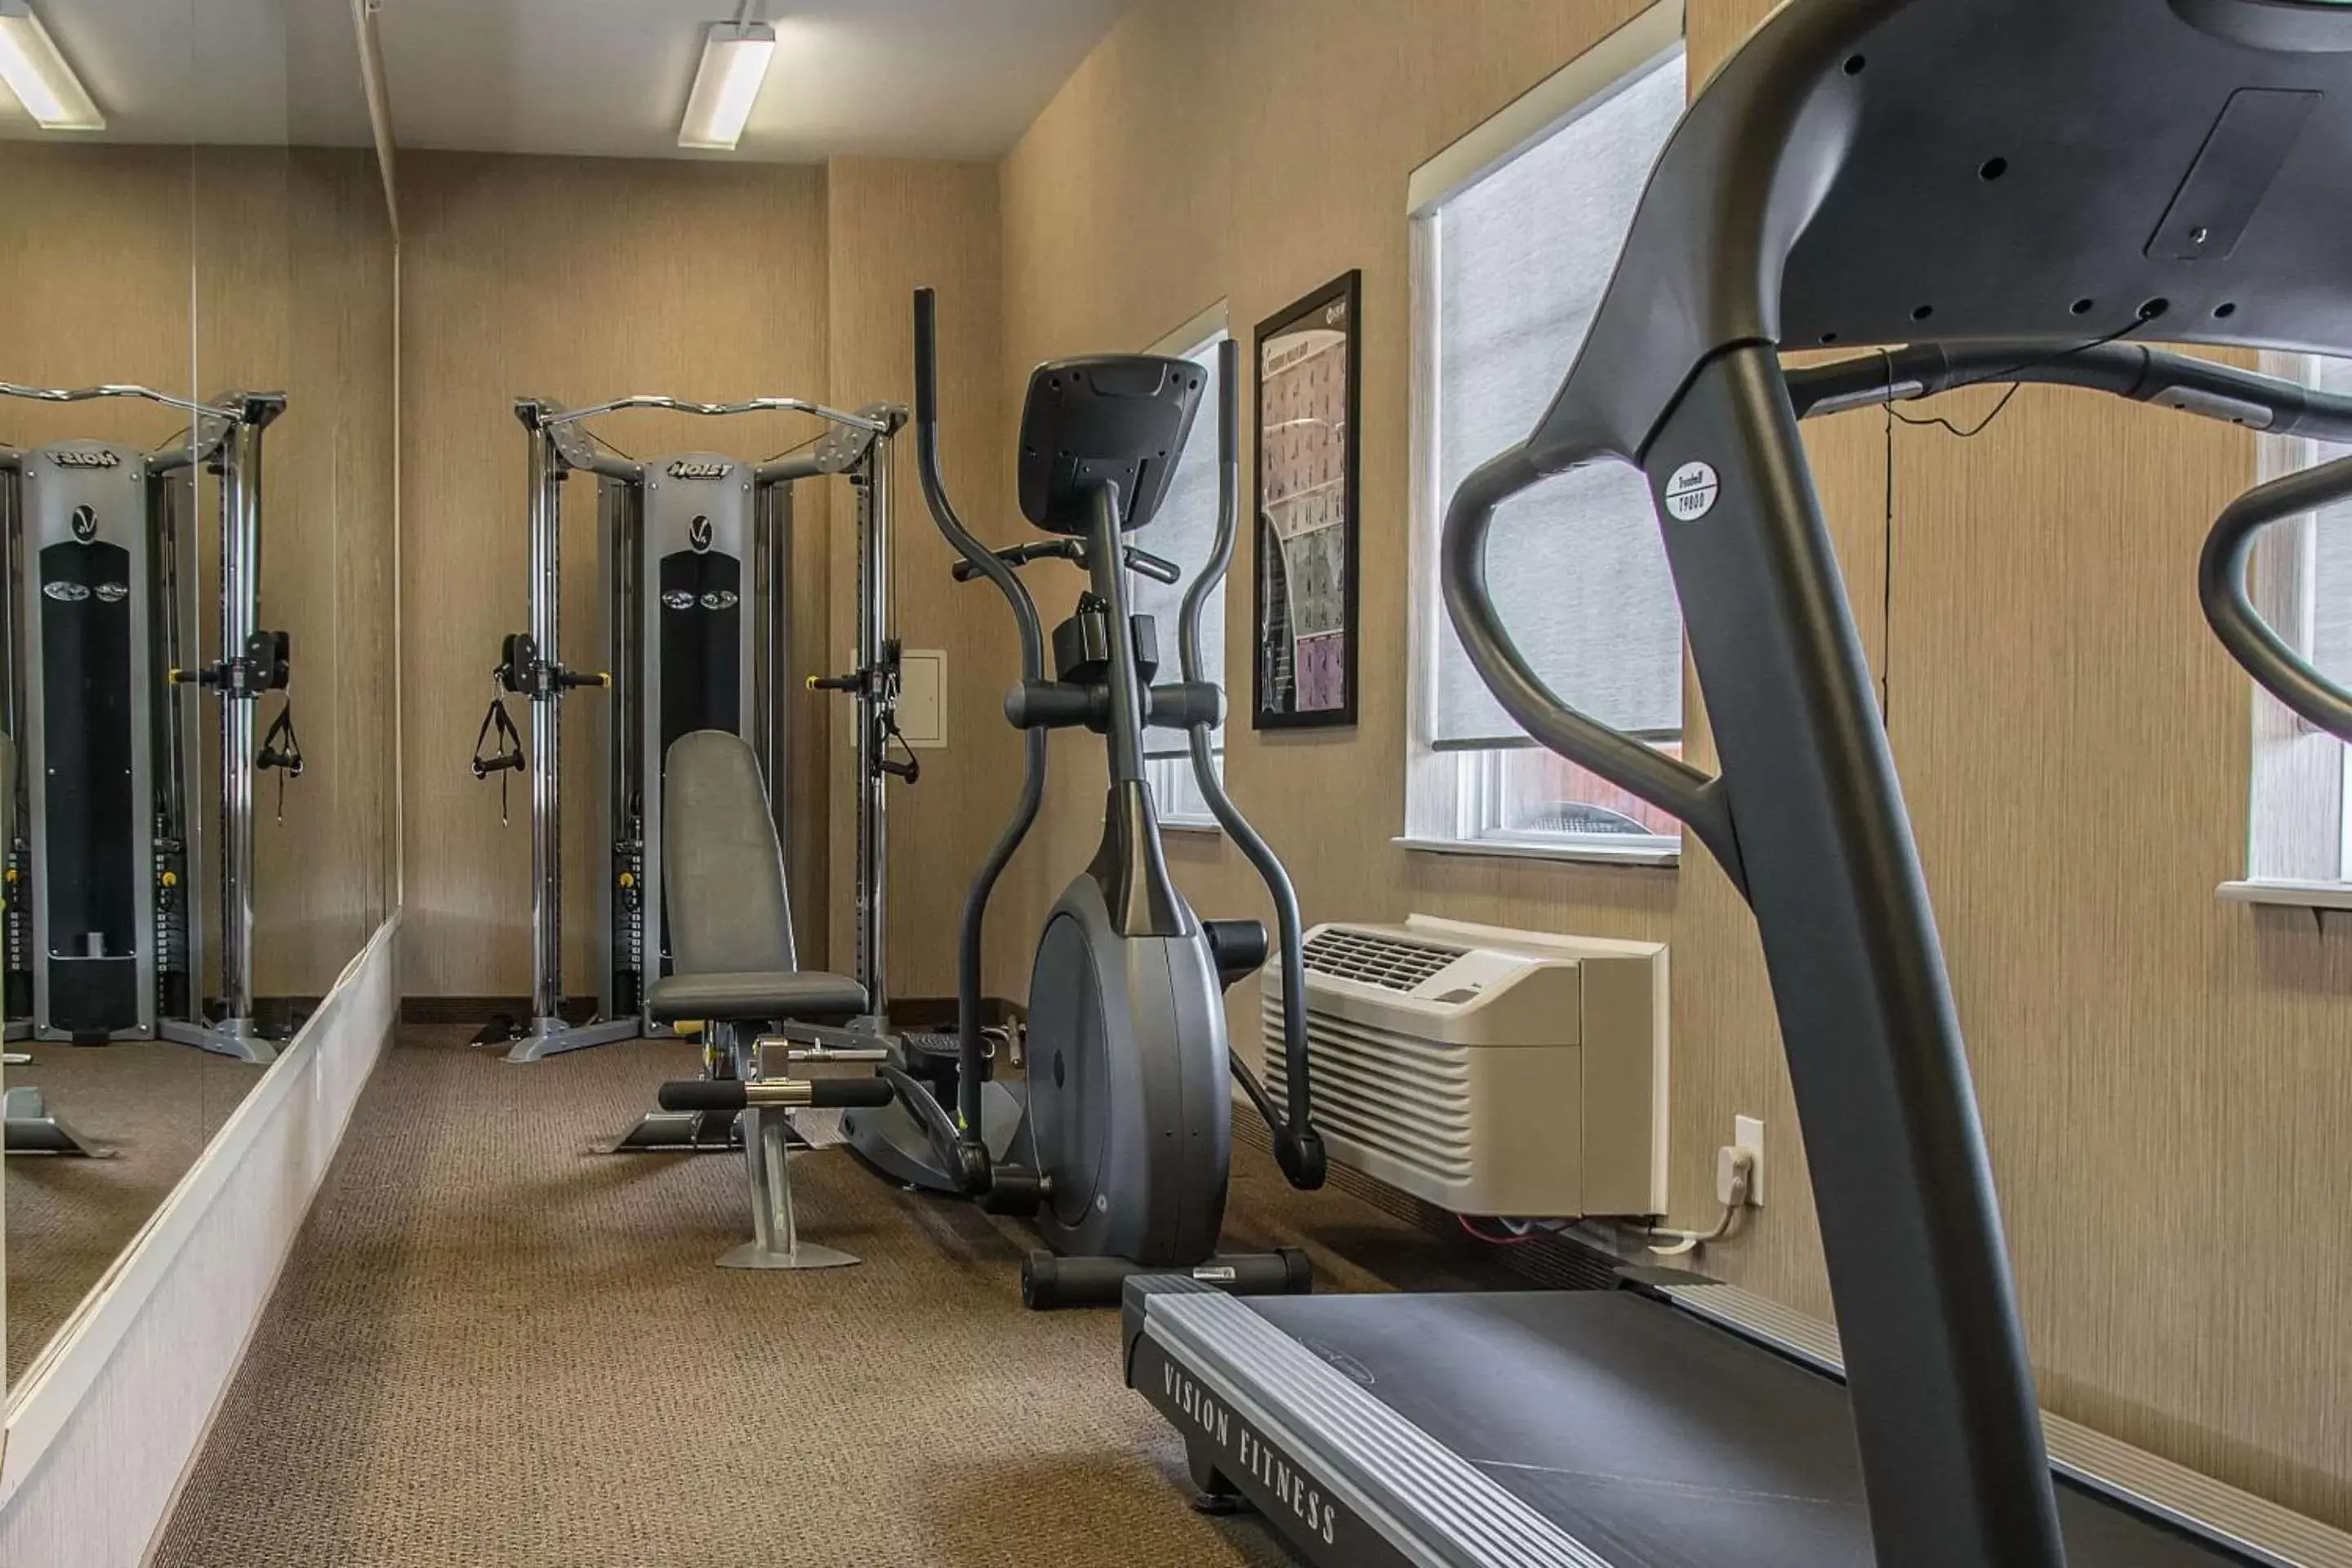 Fitness centre/facilities, Fitness Center/Facilities in MainStay Suites Winnipeg